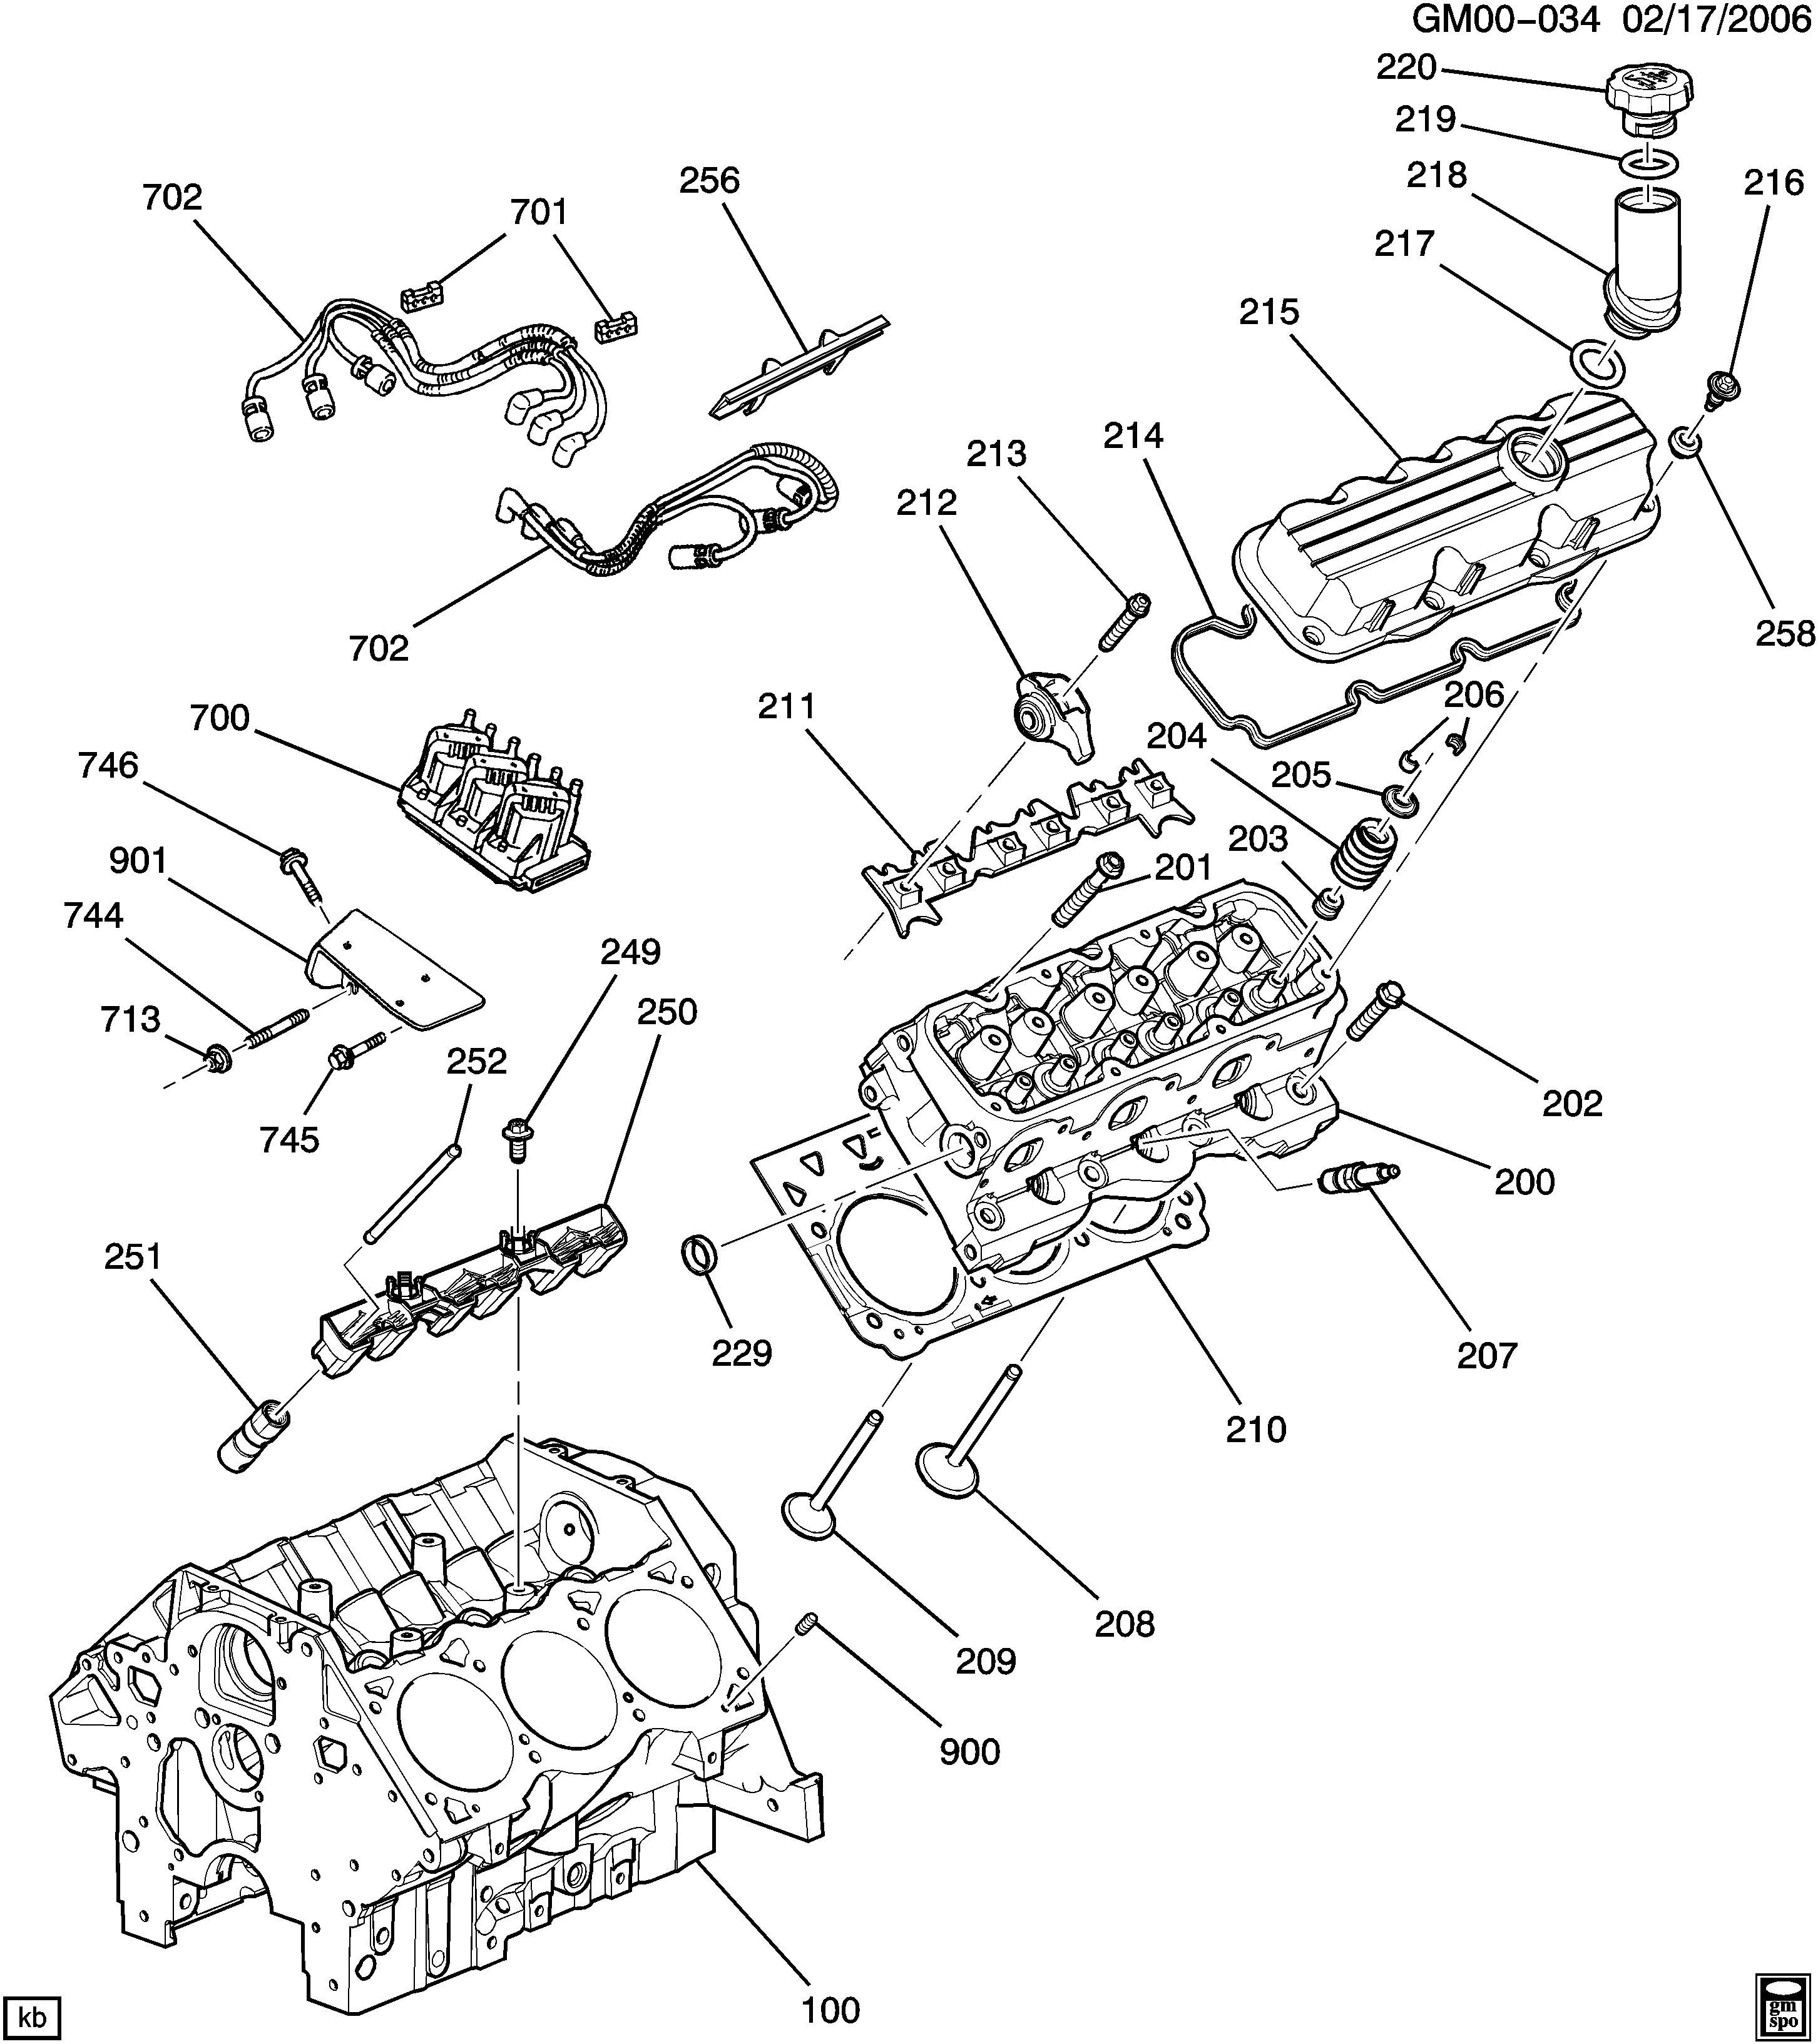 1997-2005 C ENGINE ASM-3.8L V6 PART 2 CYLINDER HEAD AND RELATED PARTS (L67/3.8-1)